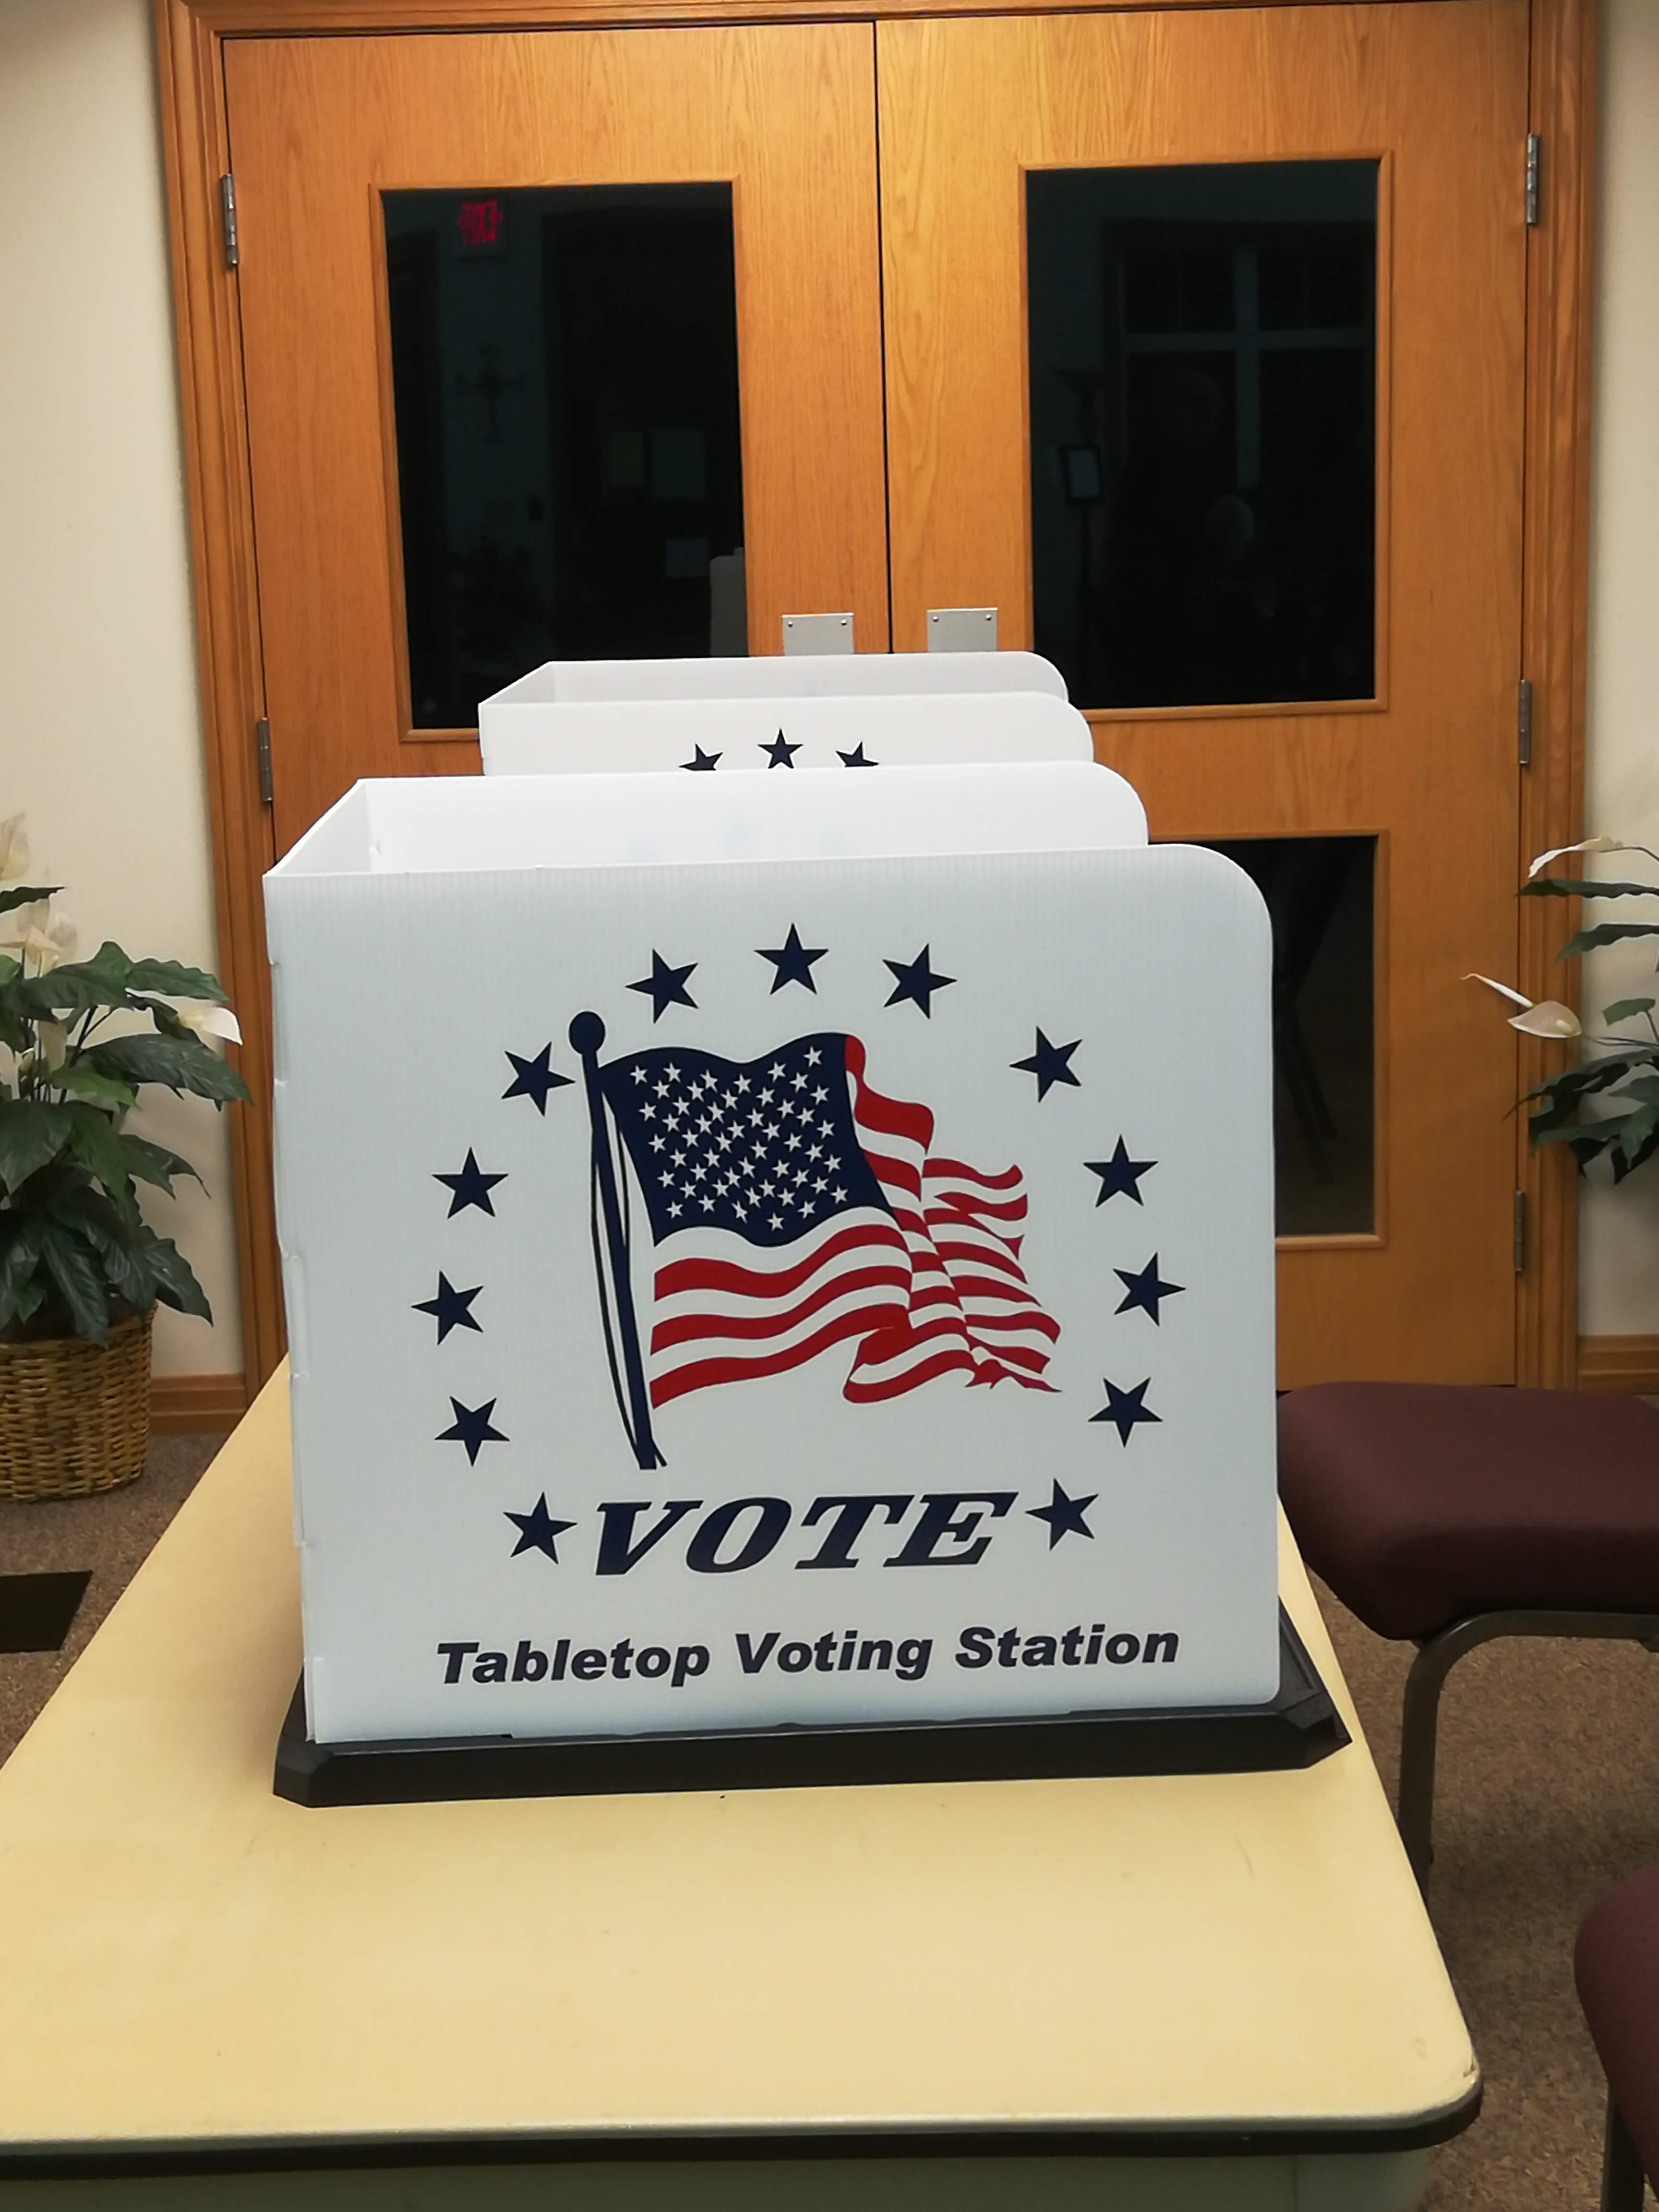 Action Alert – Tell Them to Say “No” to Universal Mail-in Voting